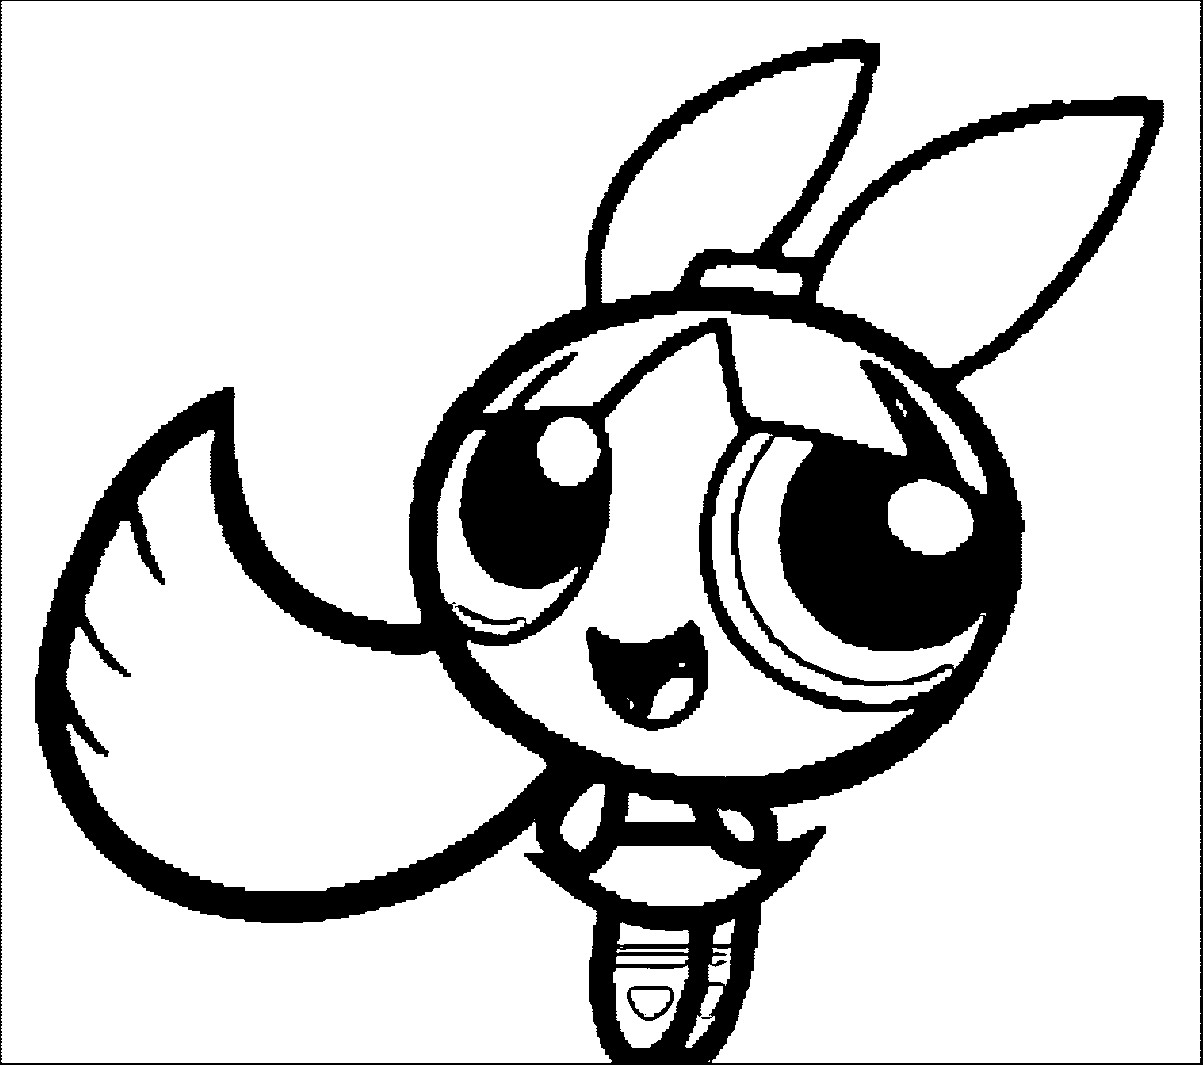 Powerpuff Girls Blossom Coloring Pages
 Powerpuff Blossom Coloring Pages